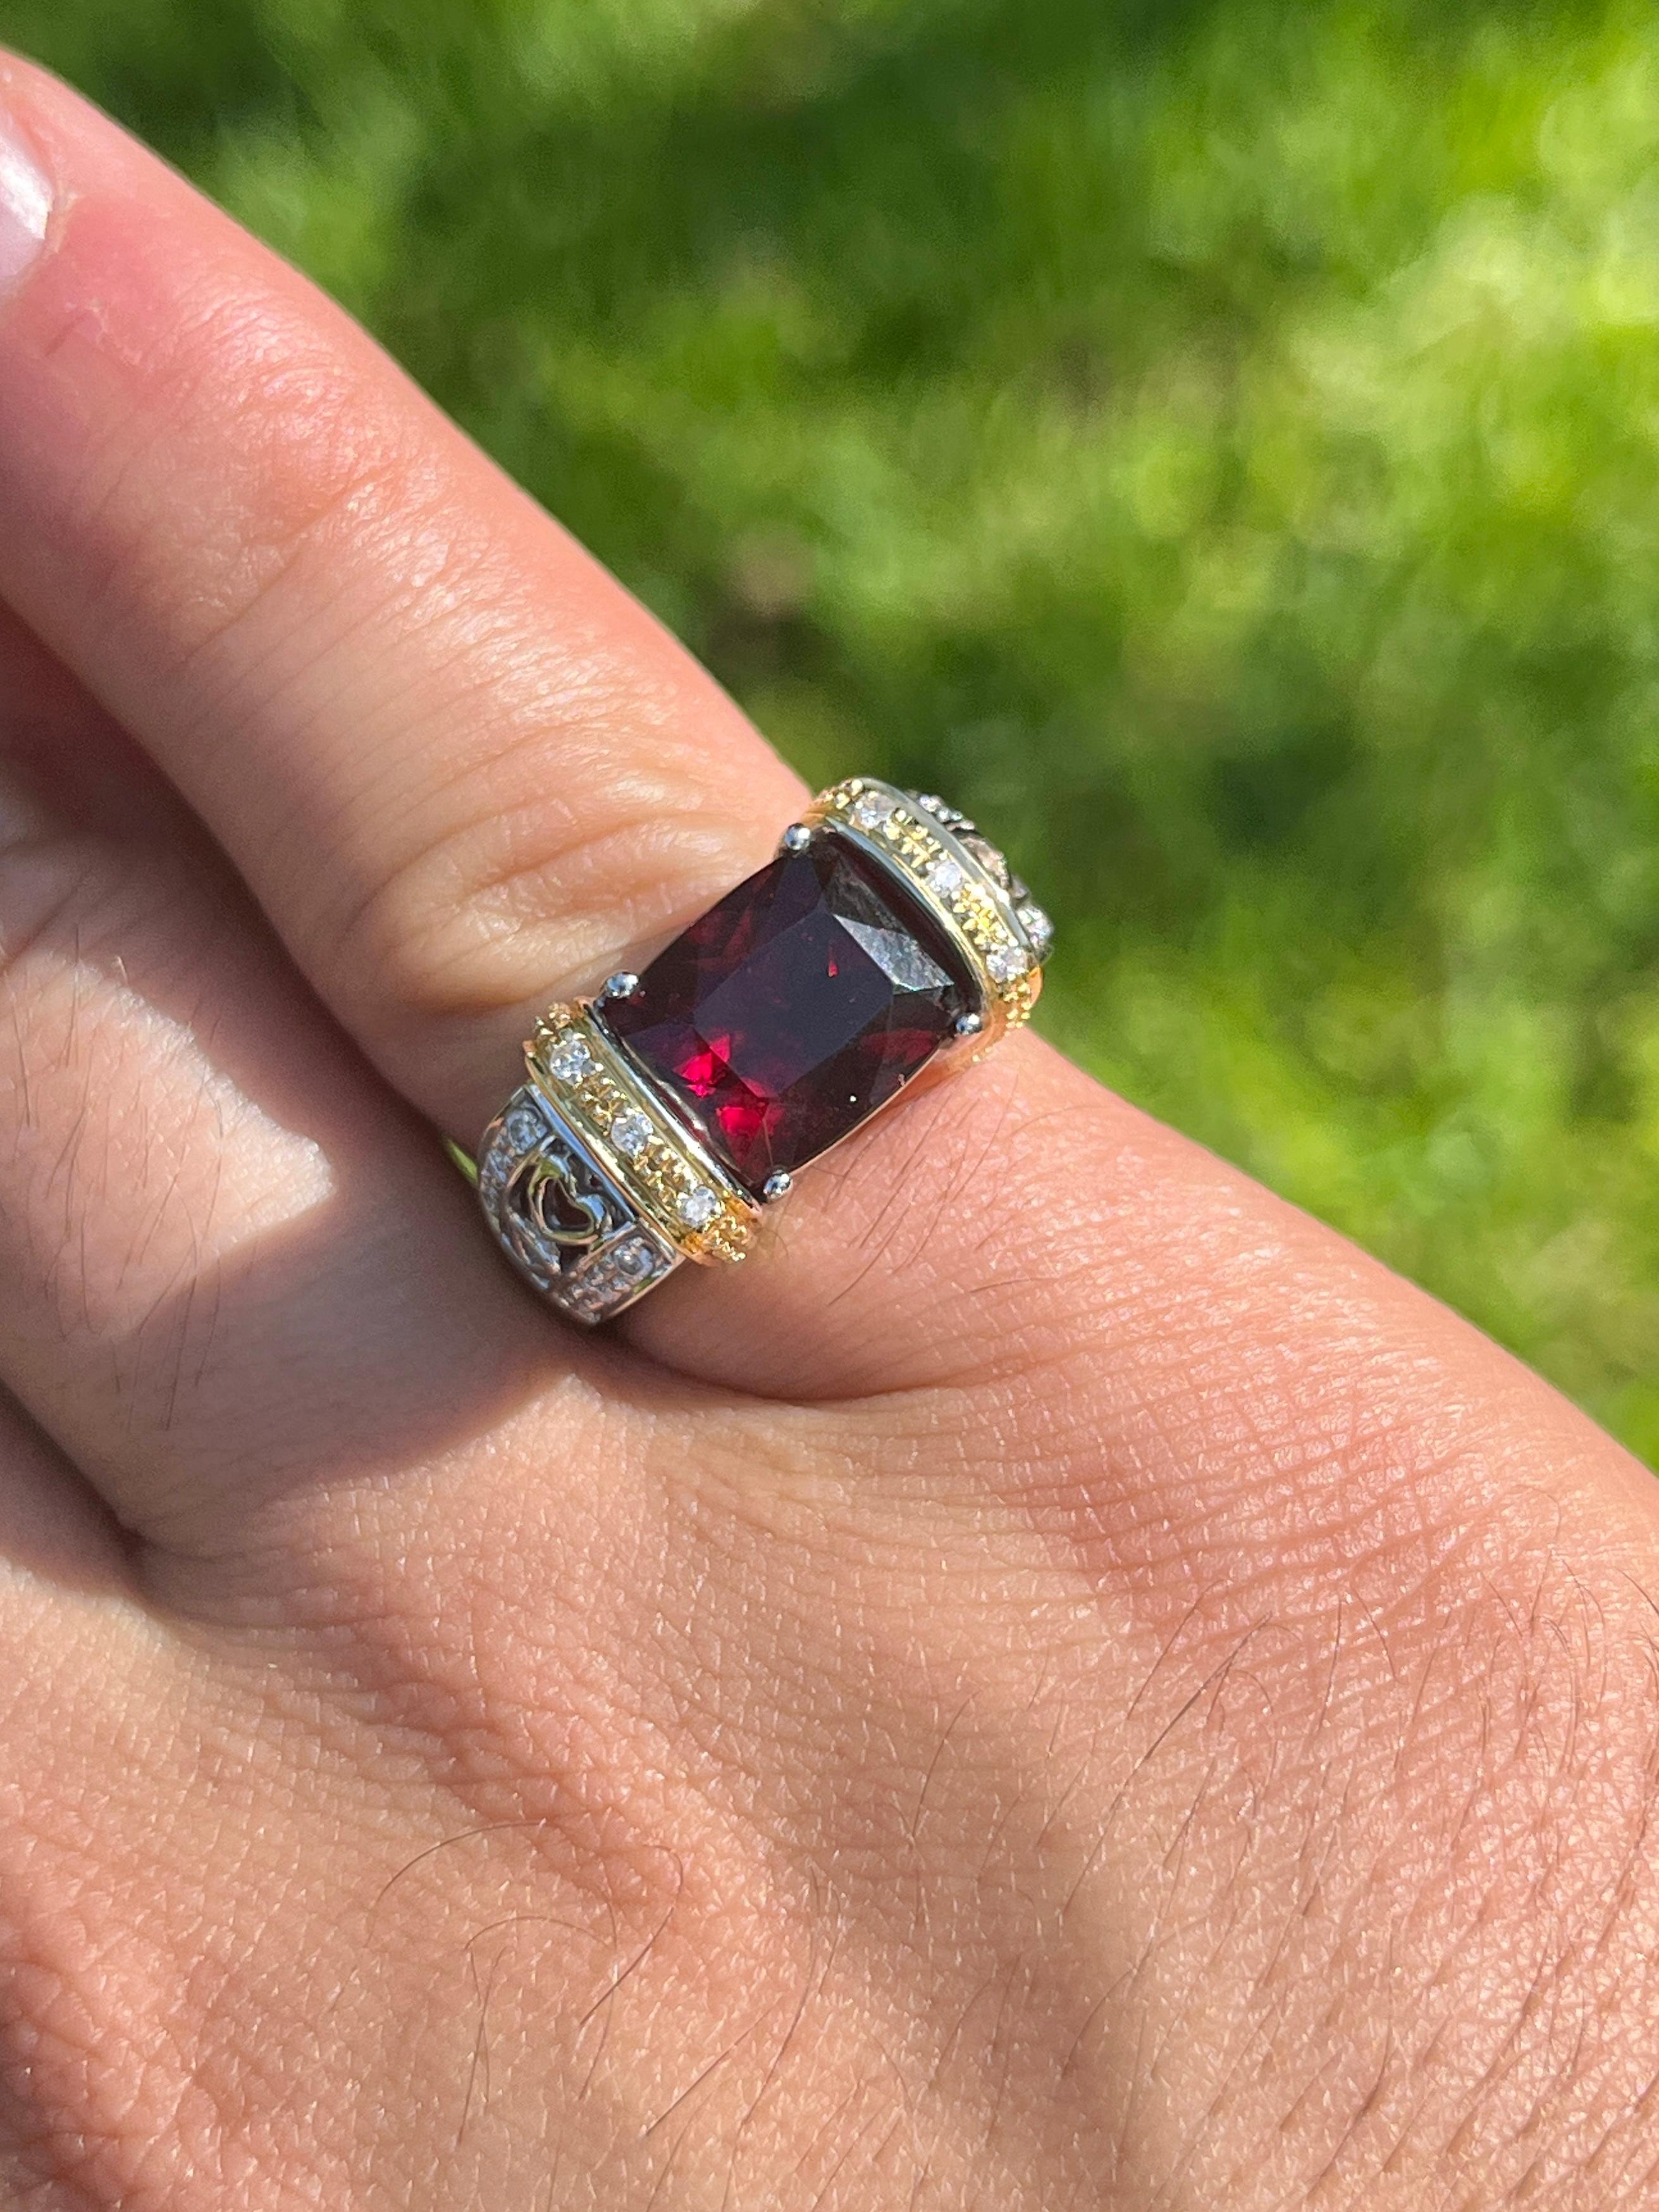 Vintage radiant cut 5.50 carat red Rubellite Tourmaline with 0.30 CTTW in diamond side stones with heart motif filigree ring shank. Crafted in 18K White and Yellow Gold east/west style setting, this semi-precious gemstone ring weighs 12.2 grams and